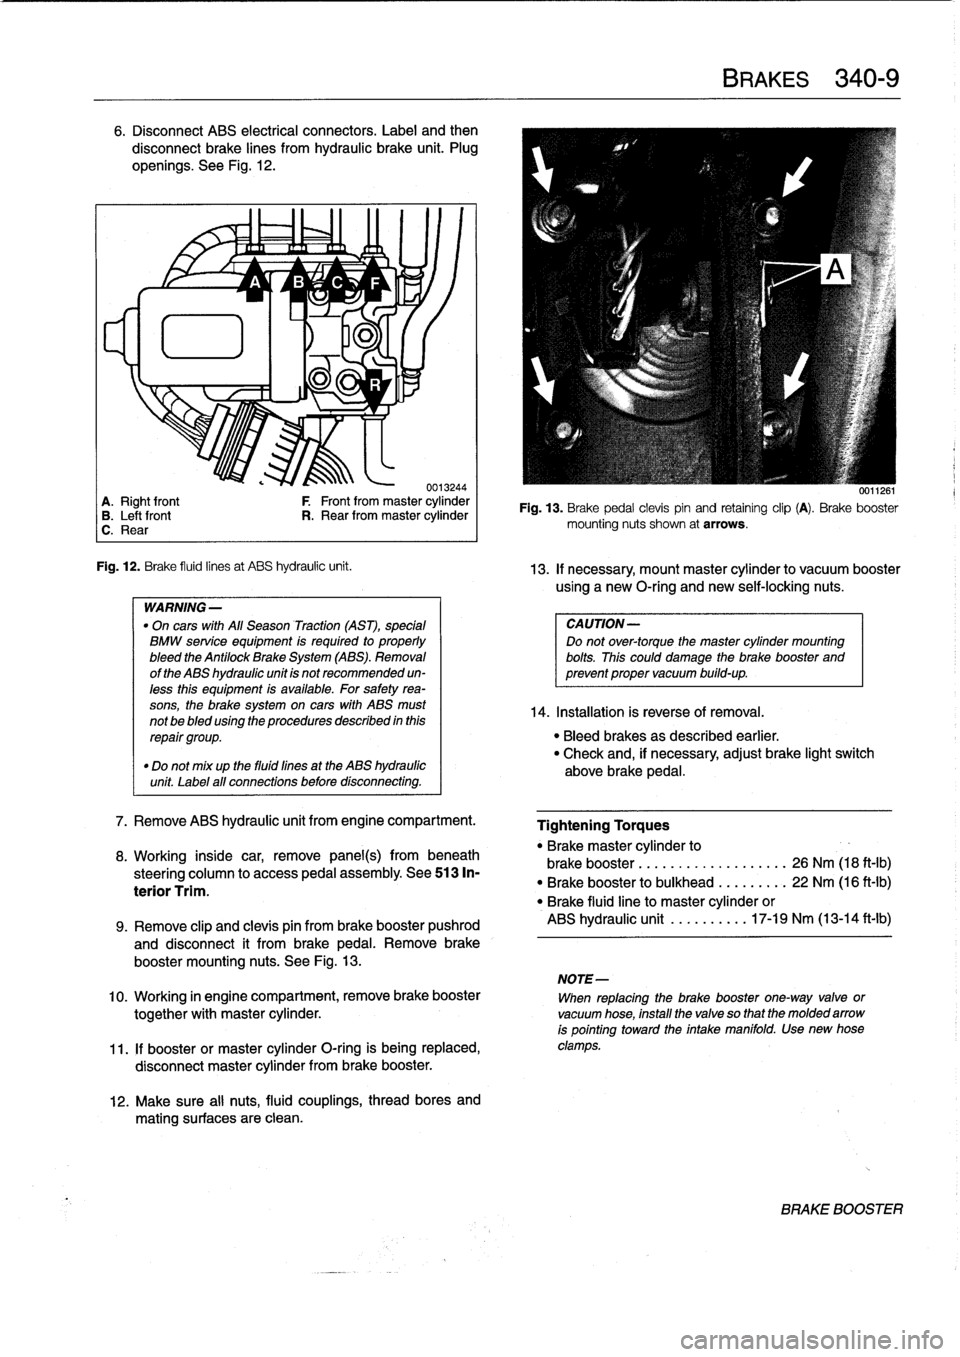 BMW 328i 1997 E36 Owners Guide 6
.
Disconnect
ABS
electrical
connectors
.
Label
and
then

disconnect
brake
lines
from
hydraulic
brake
unit
.
Plug

openíngs
.
See
Fig
.
12
.

~
~
A
1/
B
1v
C
~
F

lu
11
-ri
J
.

0013244
A
.
Right
f